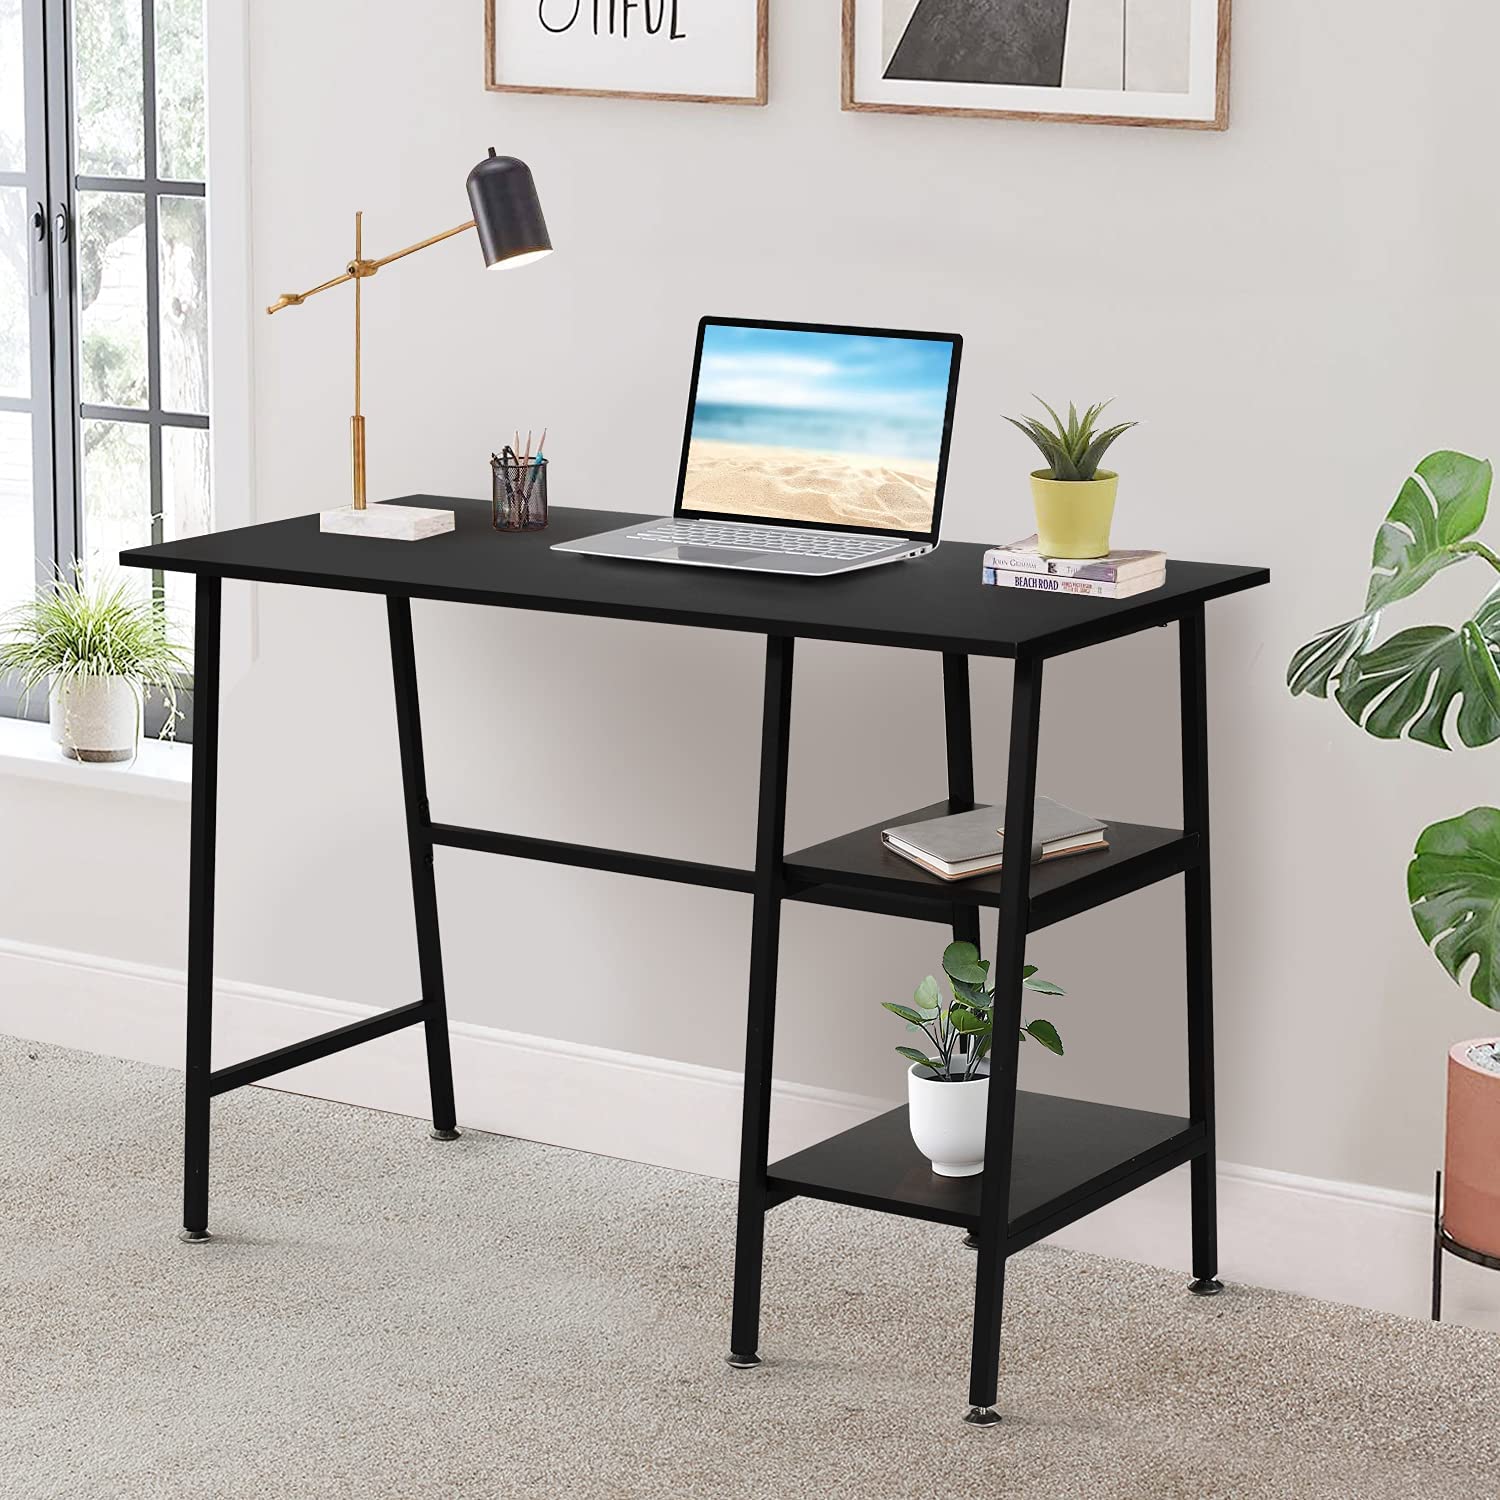 Laptop Desk Study Table Standing Office Desk Gaming Student Bedroom  Computer Desk Accessories simple Home Office